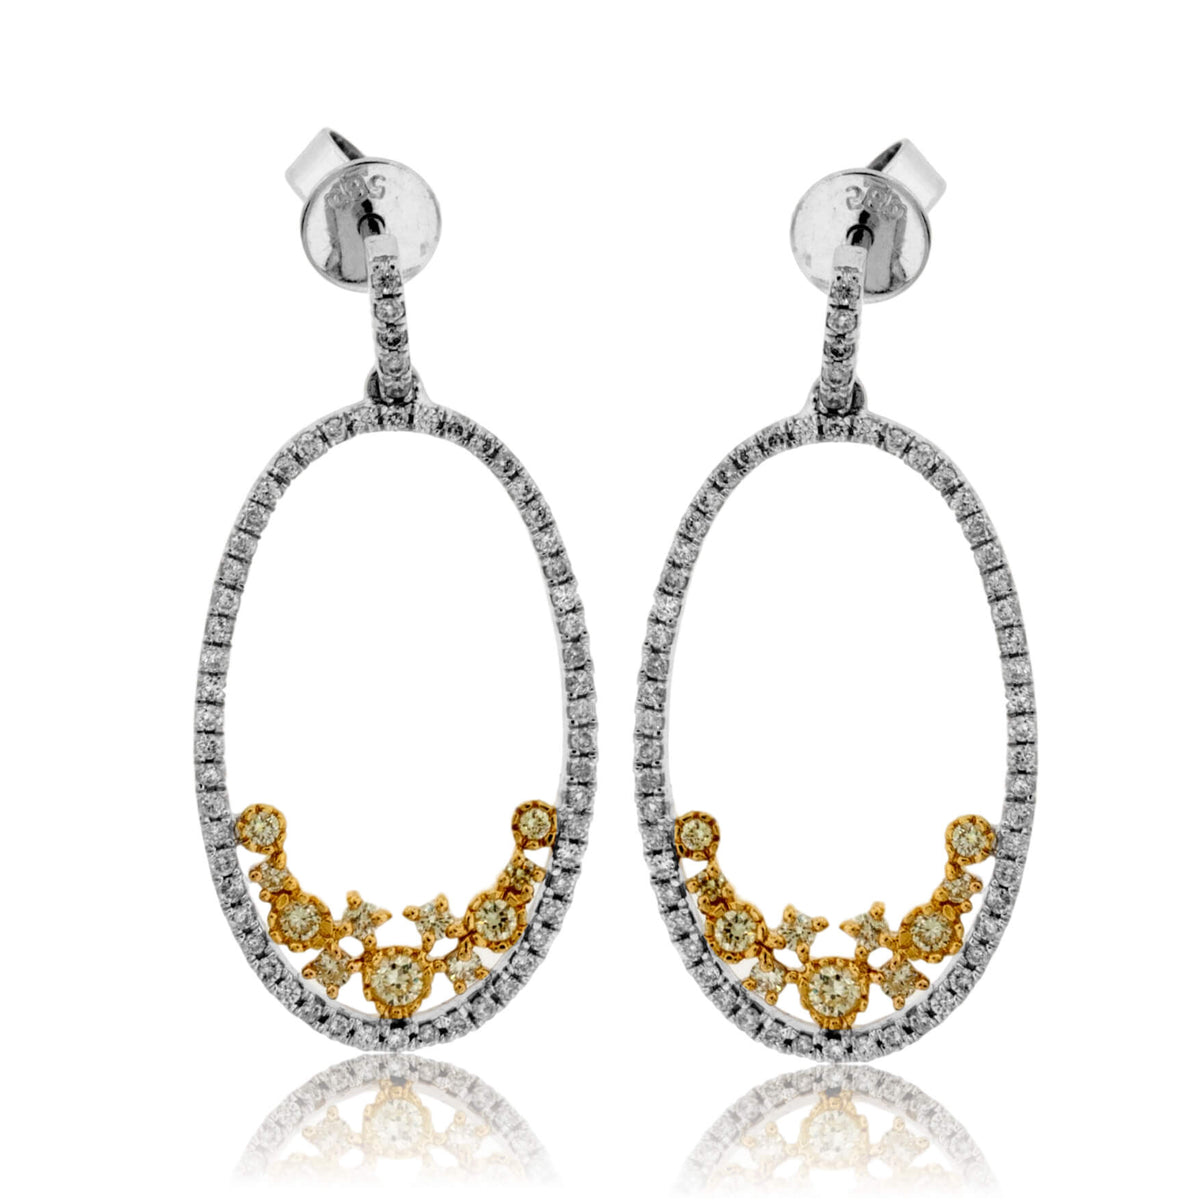 White Diamond Oval with Yellow Diamond Accent Earrings - Park City Jewelers